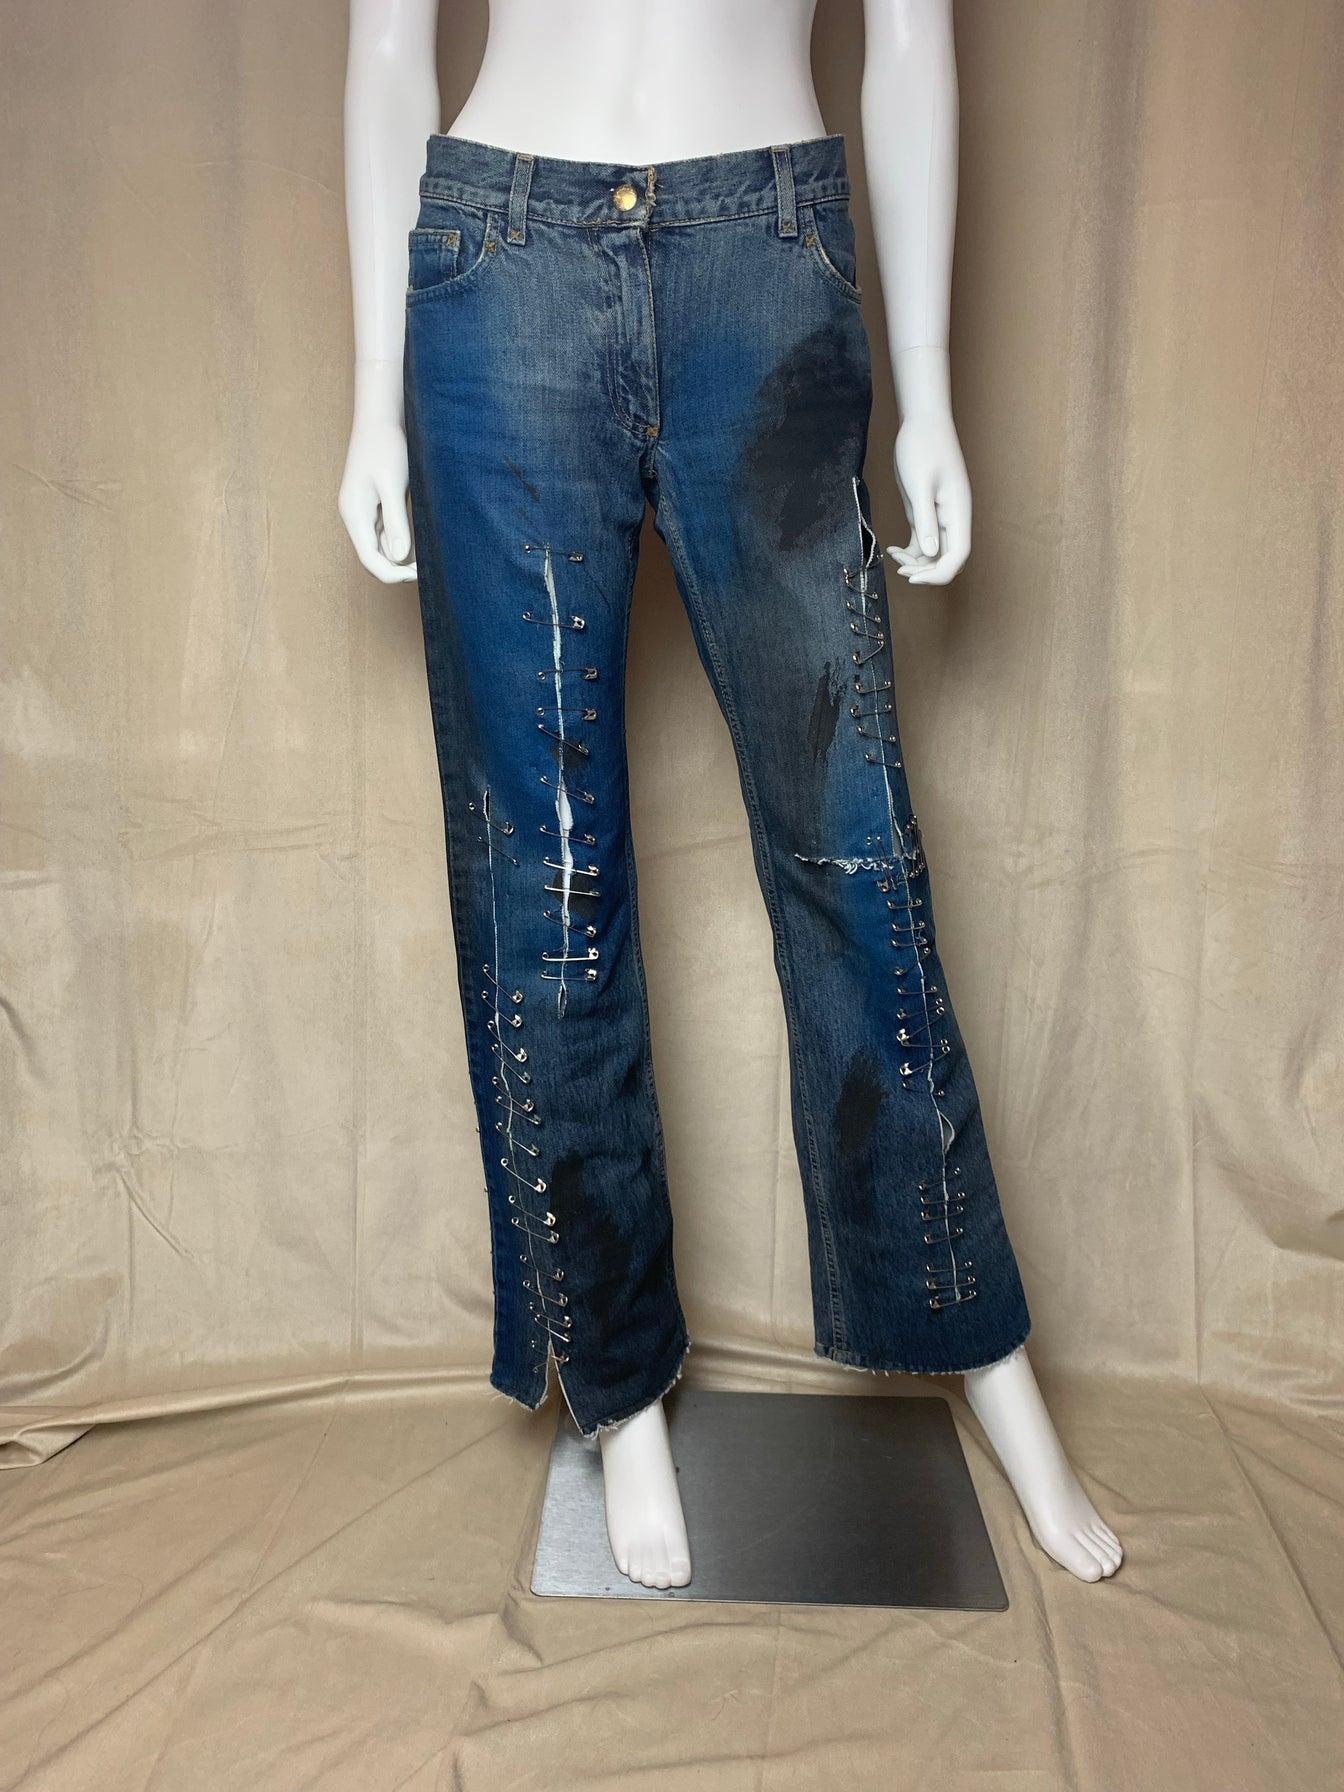 jeans 2001